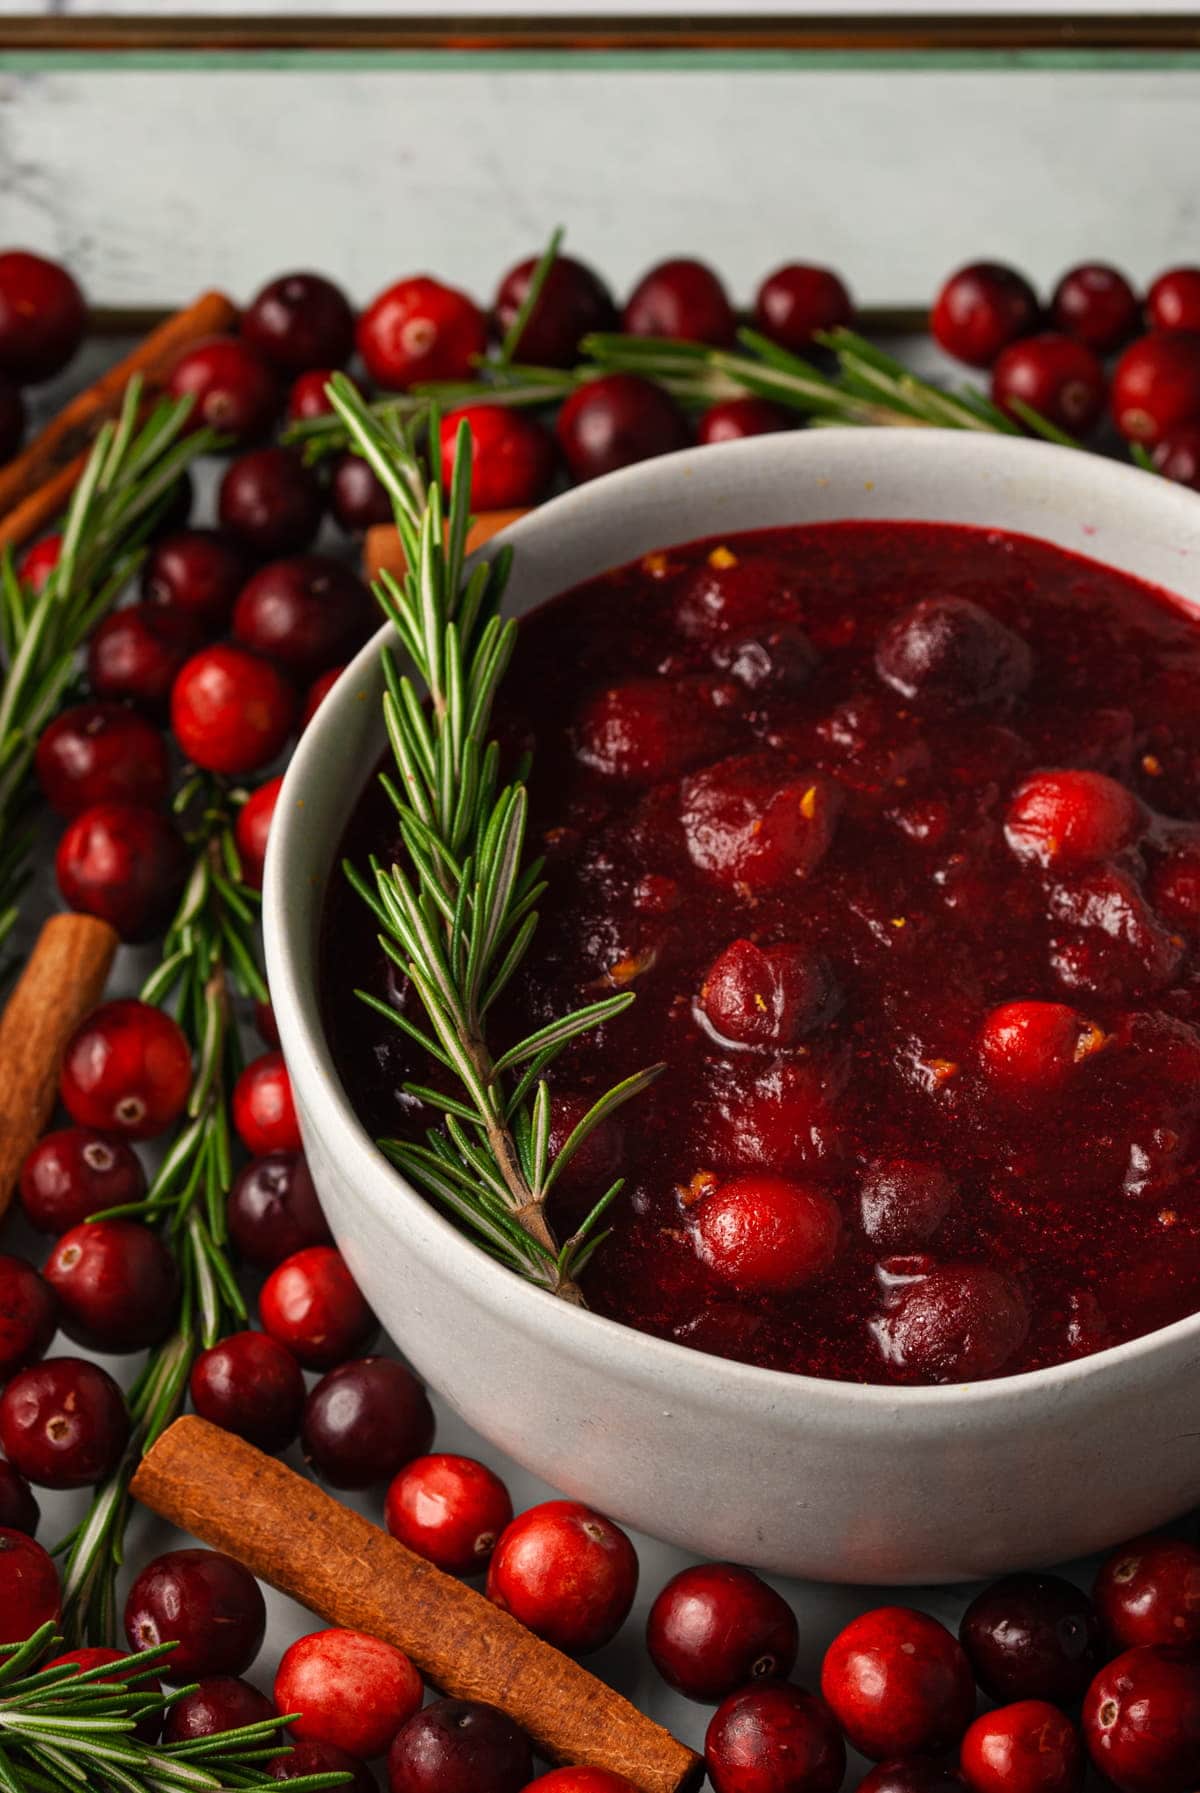 bowl of cranberry sauce with sprig of rosemary garnish, surrounded by fresh cranberries